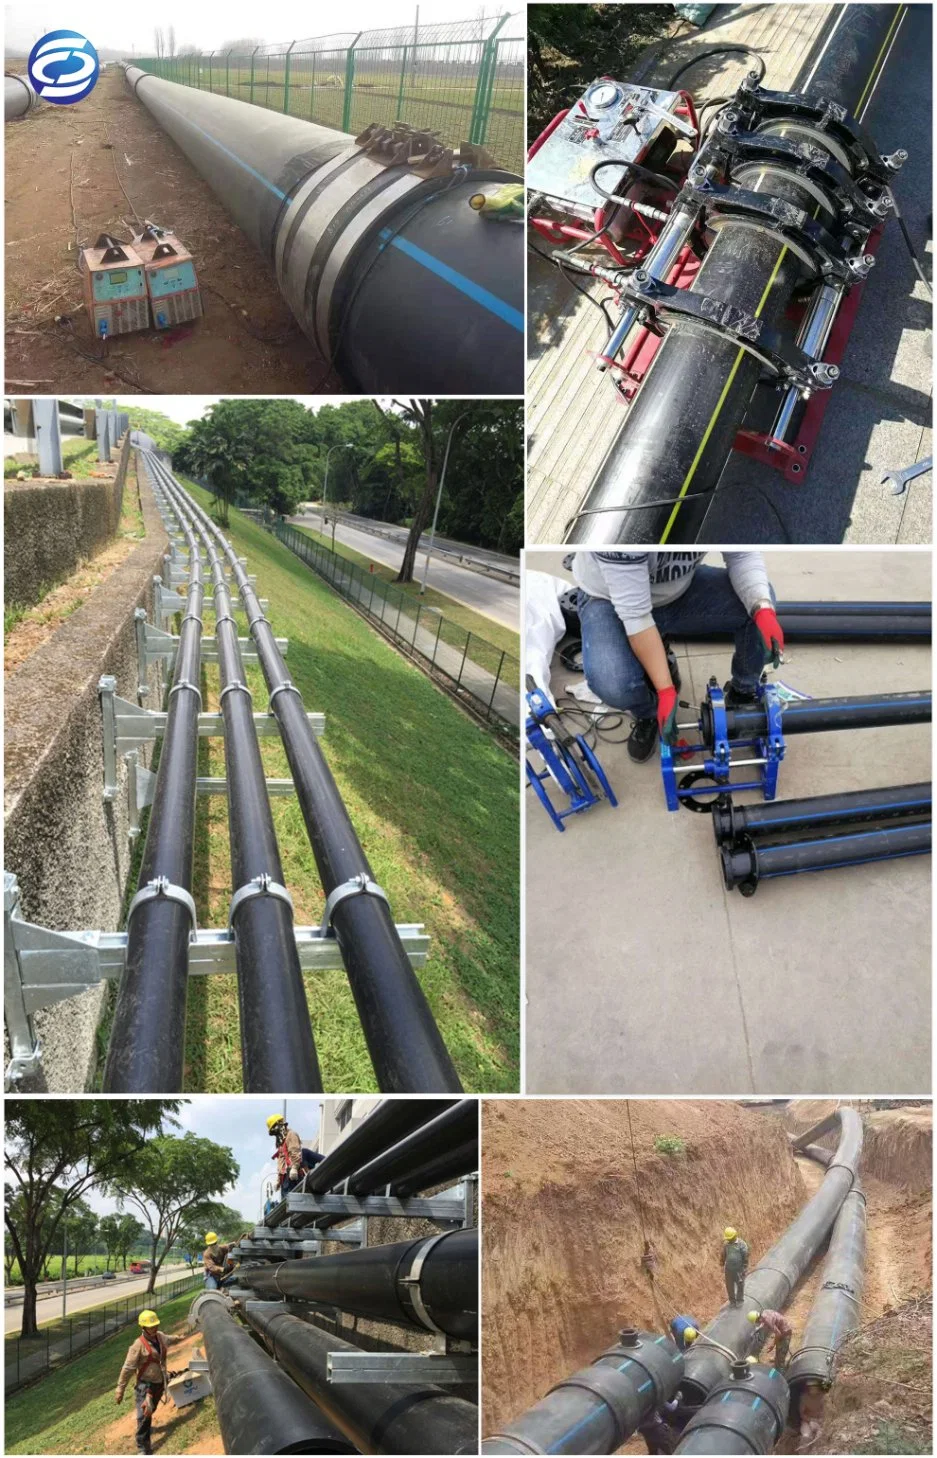 PE100 Black Plastic PE Pipe HDPE Pipe for Water Supply/Building/Gas/Agriculture Irrigation/Garden/Greenhouse/Chemical/Coupling/Fishing HDPE